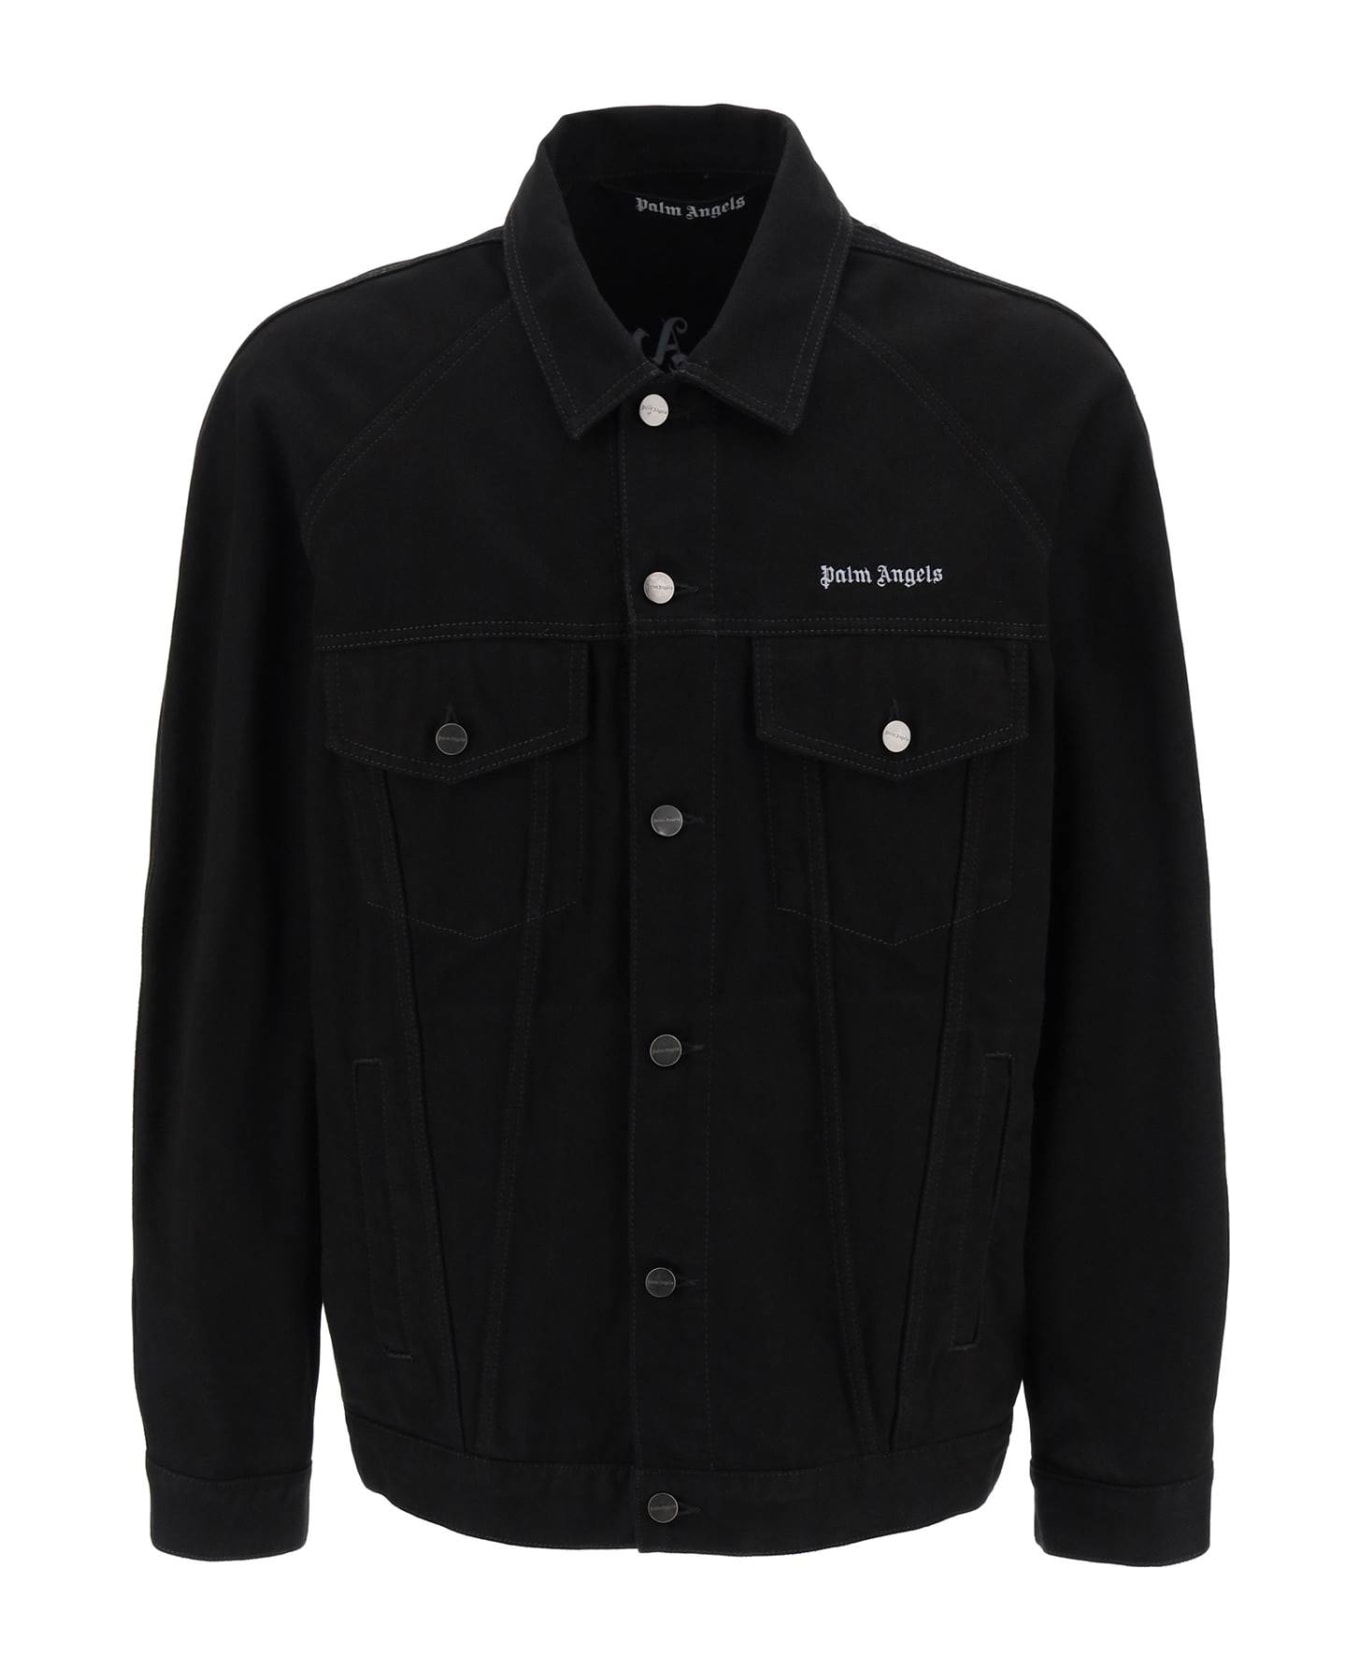 Palm Angels Denim Jacket With Logo Embroidery - Black